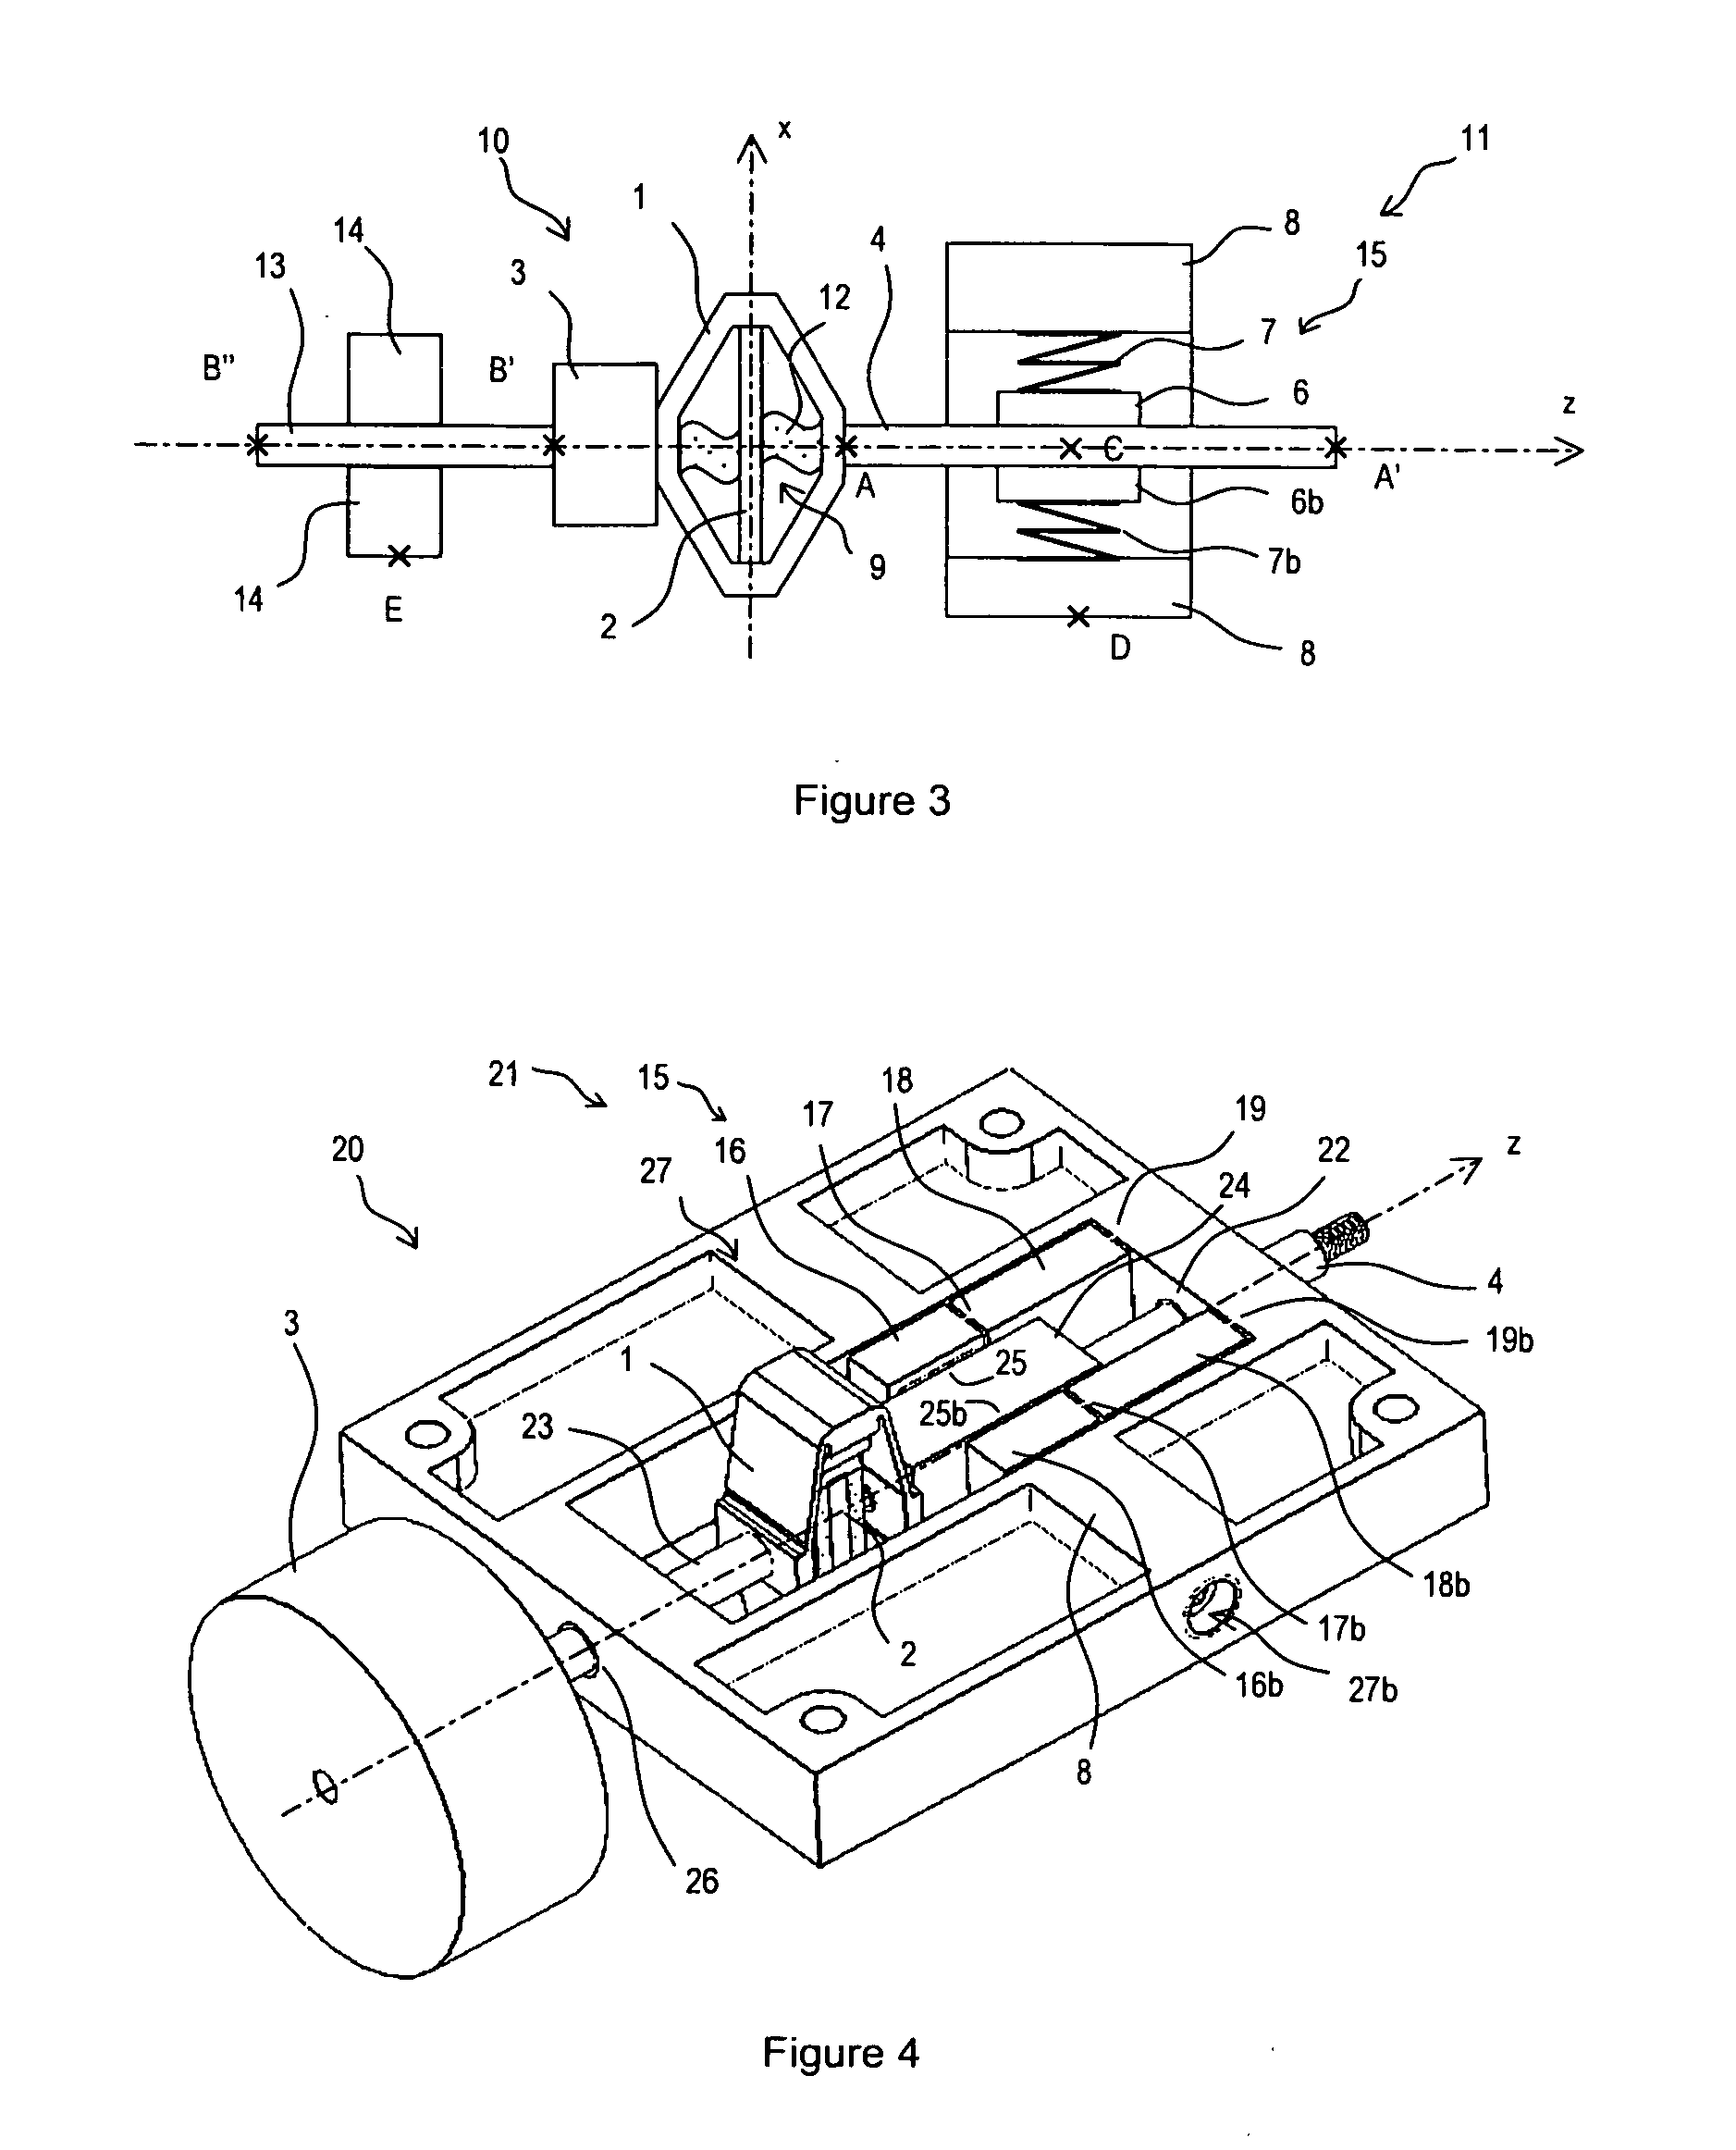 Fine positioning system using an inertial motor based on a mechanical amplifier